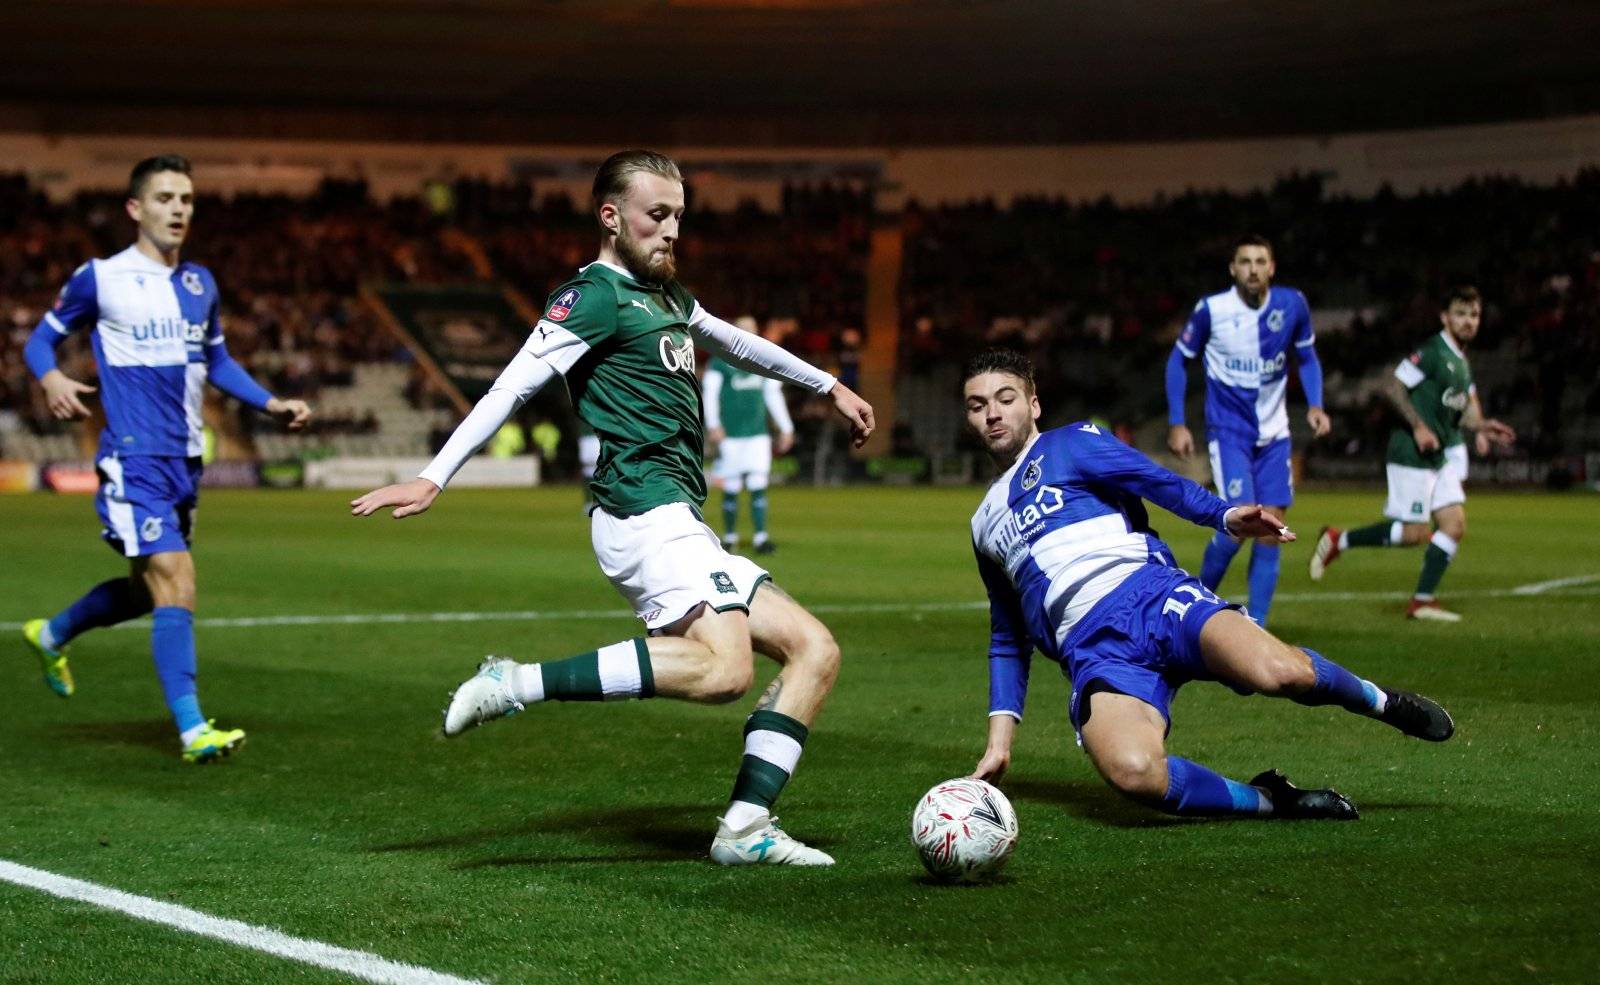 Plymouth Argyle: George Cooper will not be let go for free, insists Peterborough chief Barry Fry - Plymouth Argyle News